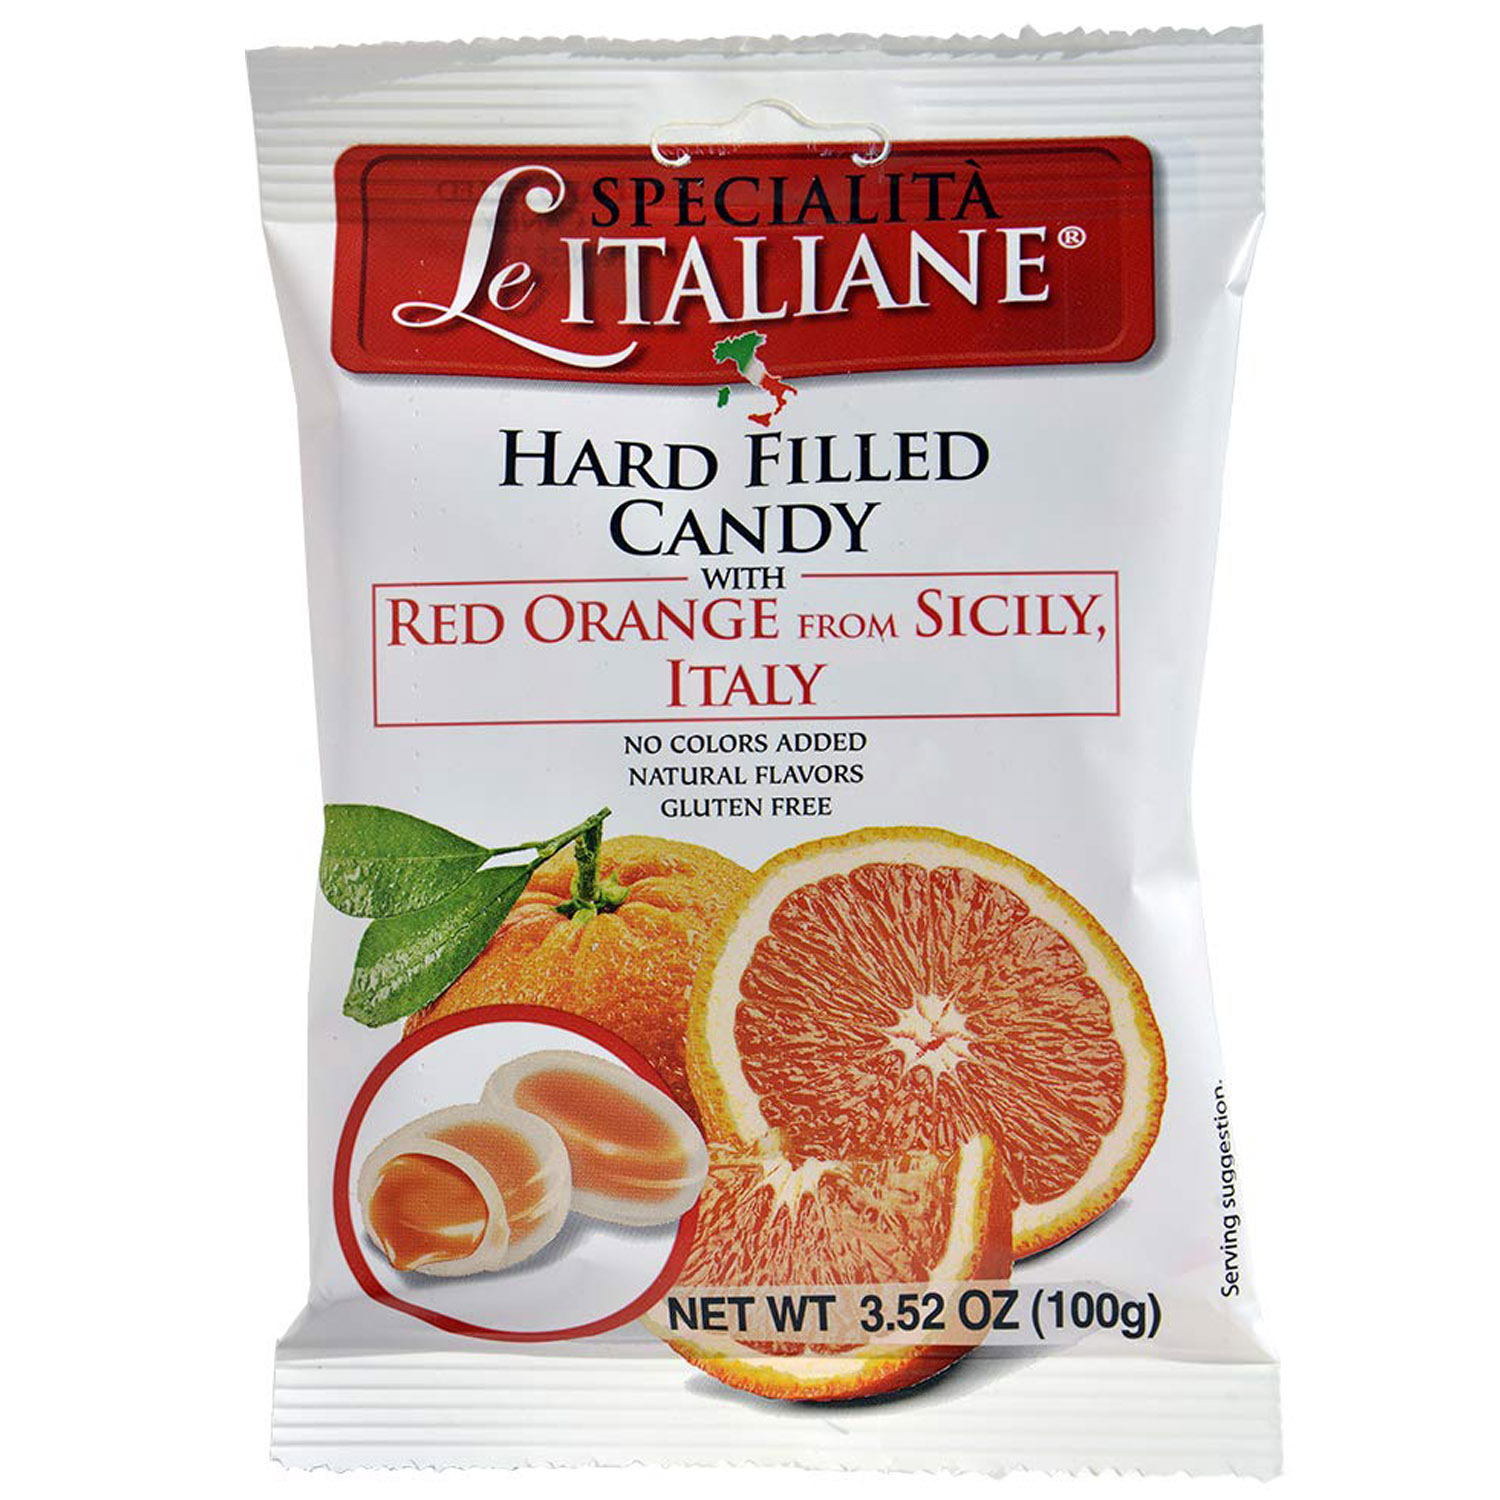 Цукерки Le Specialitа Italiane Serra Hard Filled Candy with Red Orange from Sicily - фото 1